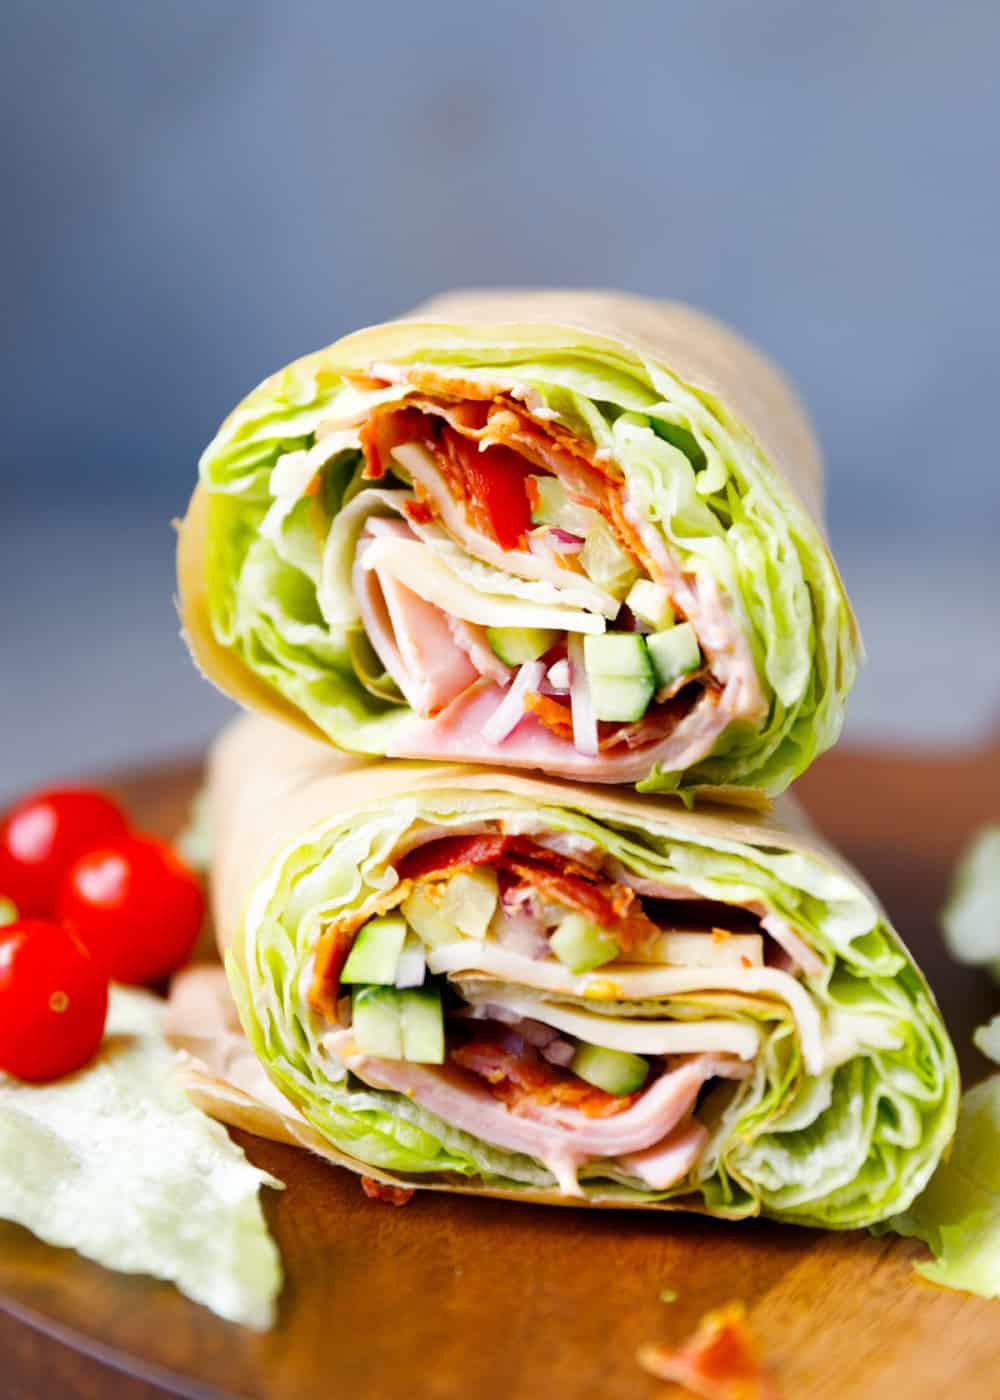 How to make a lettuce wrap sandwich (low carb, healthy) - Cooking LSL